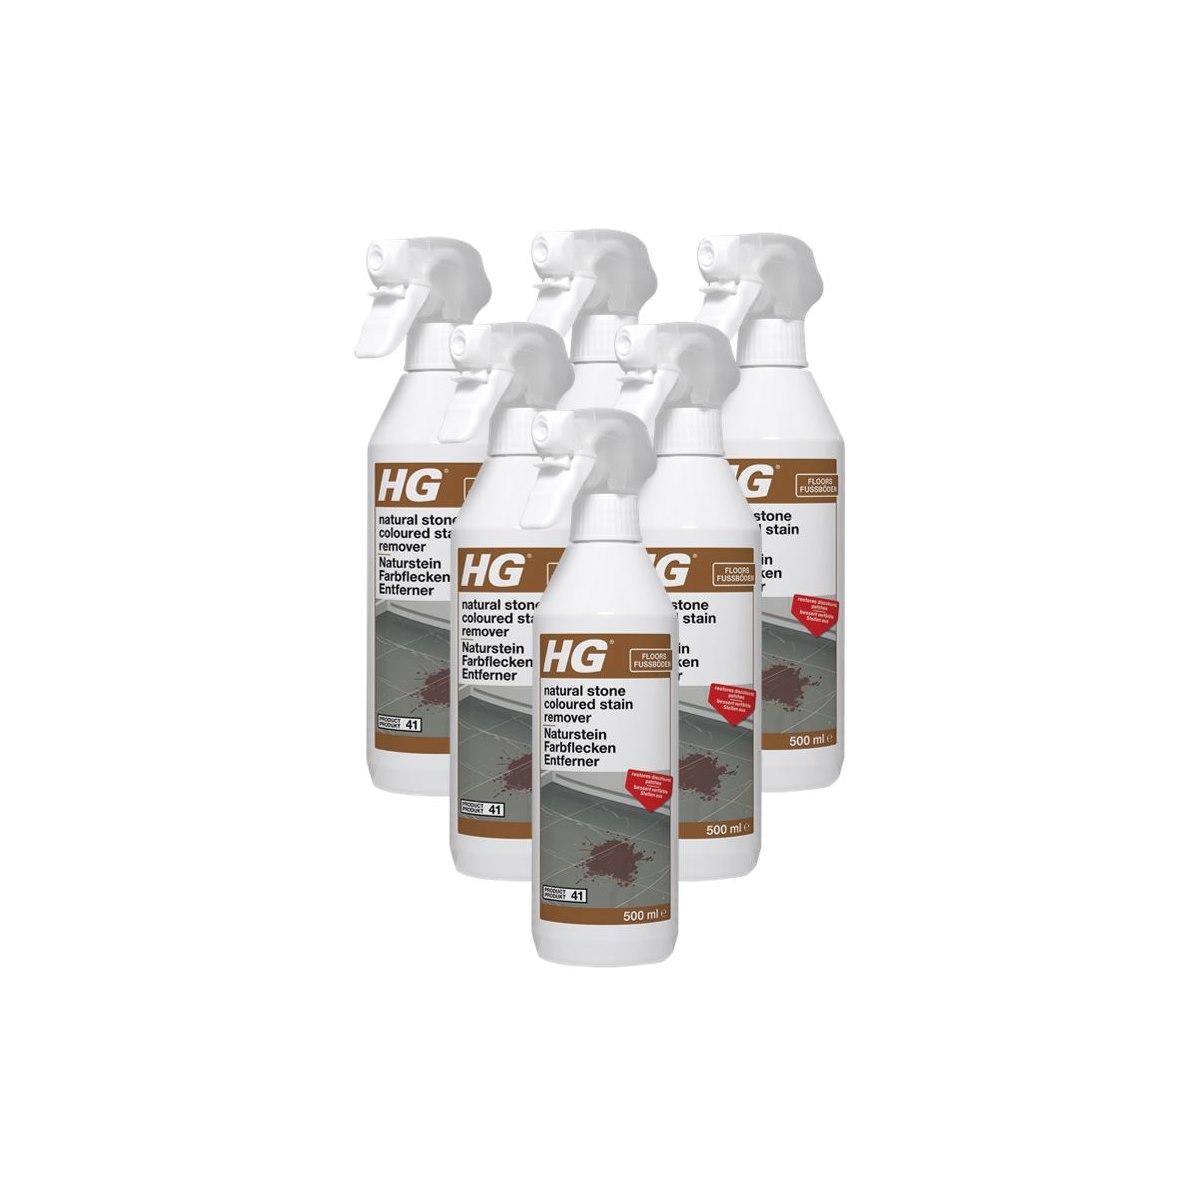 Case of 6 x HG Natural Stone Coloured Stain Remover P41